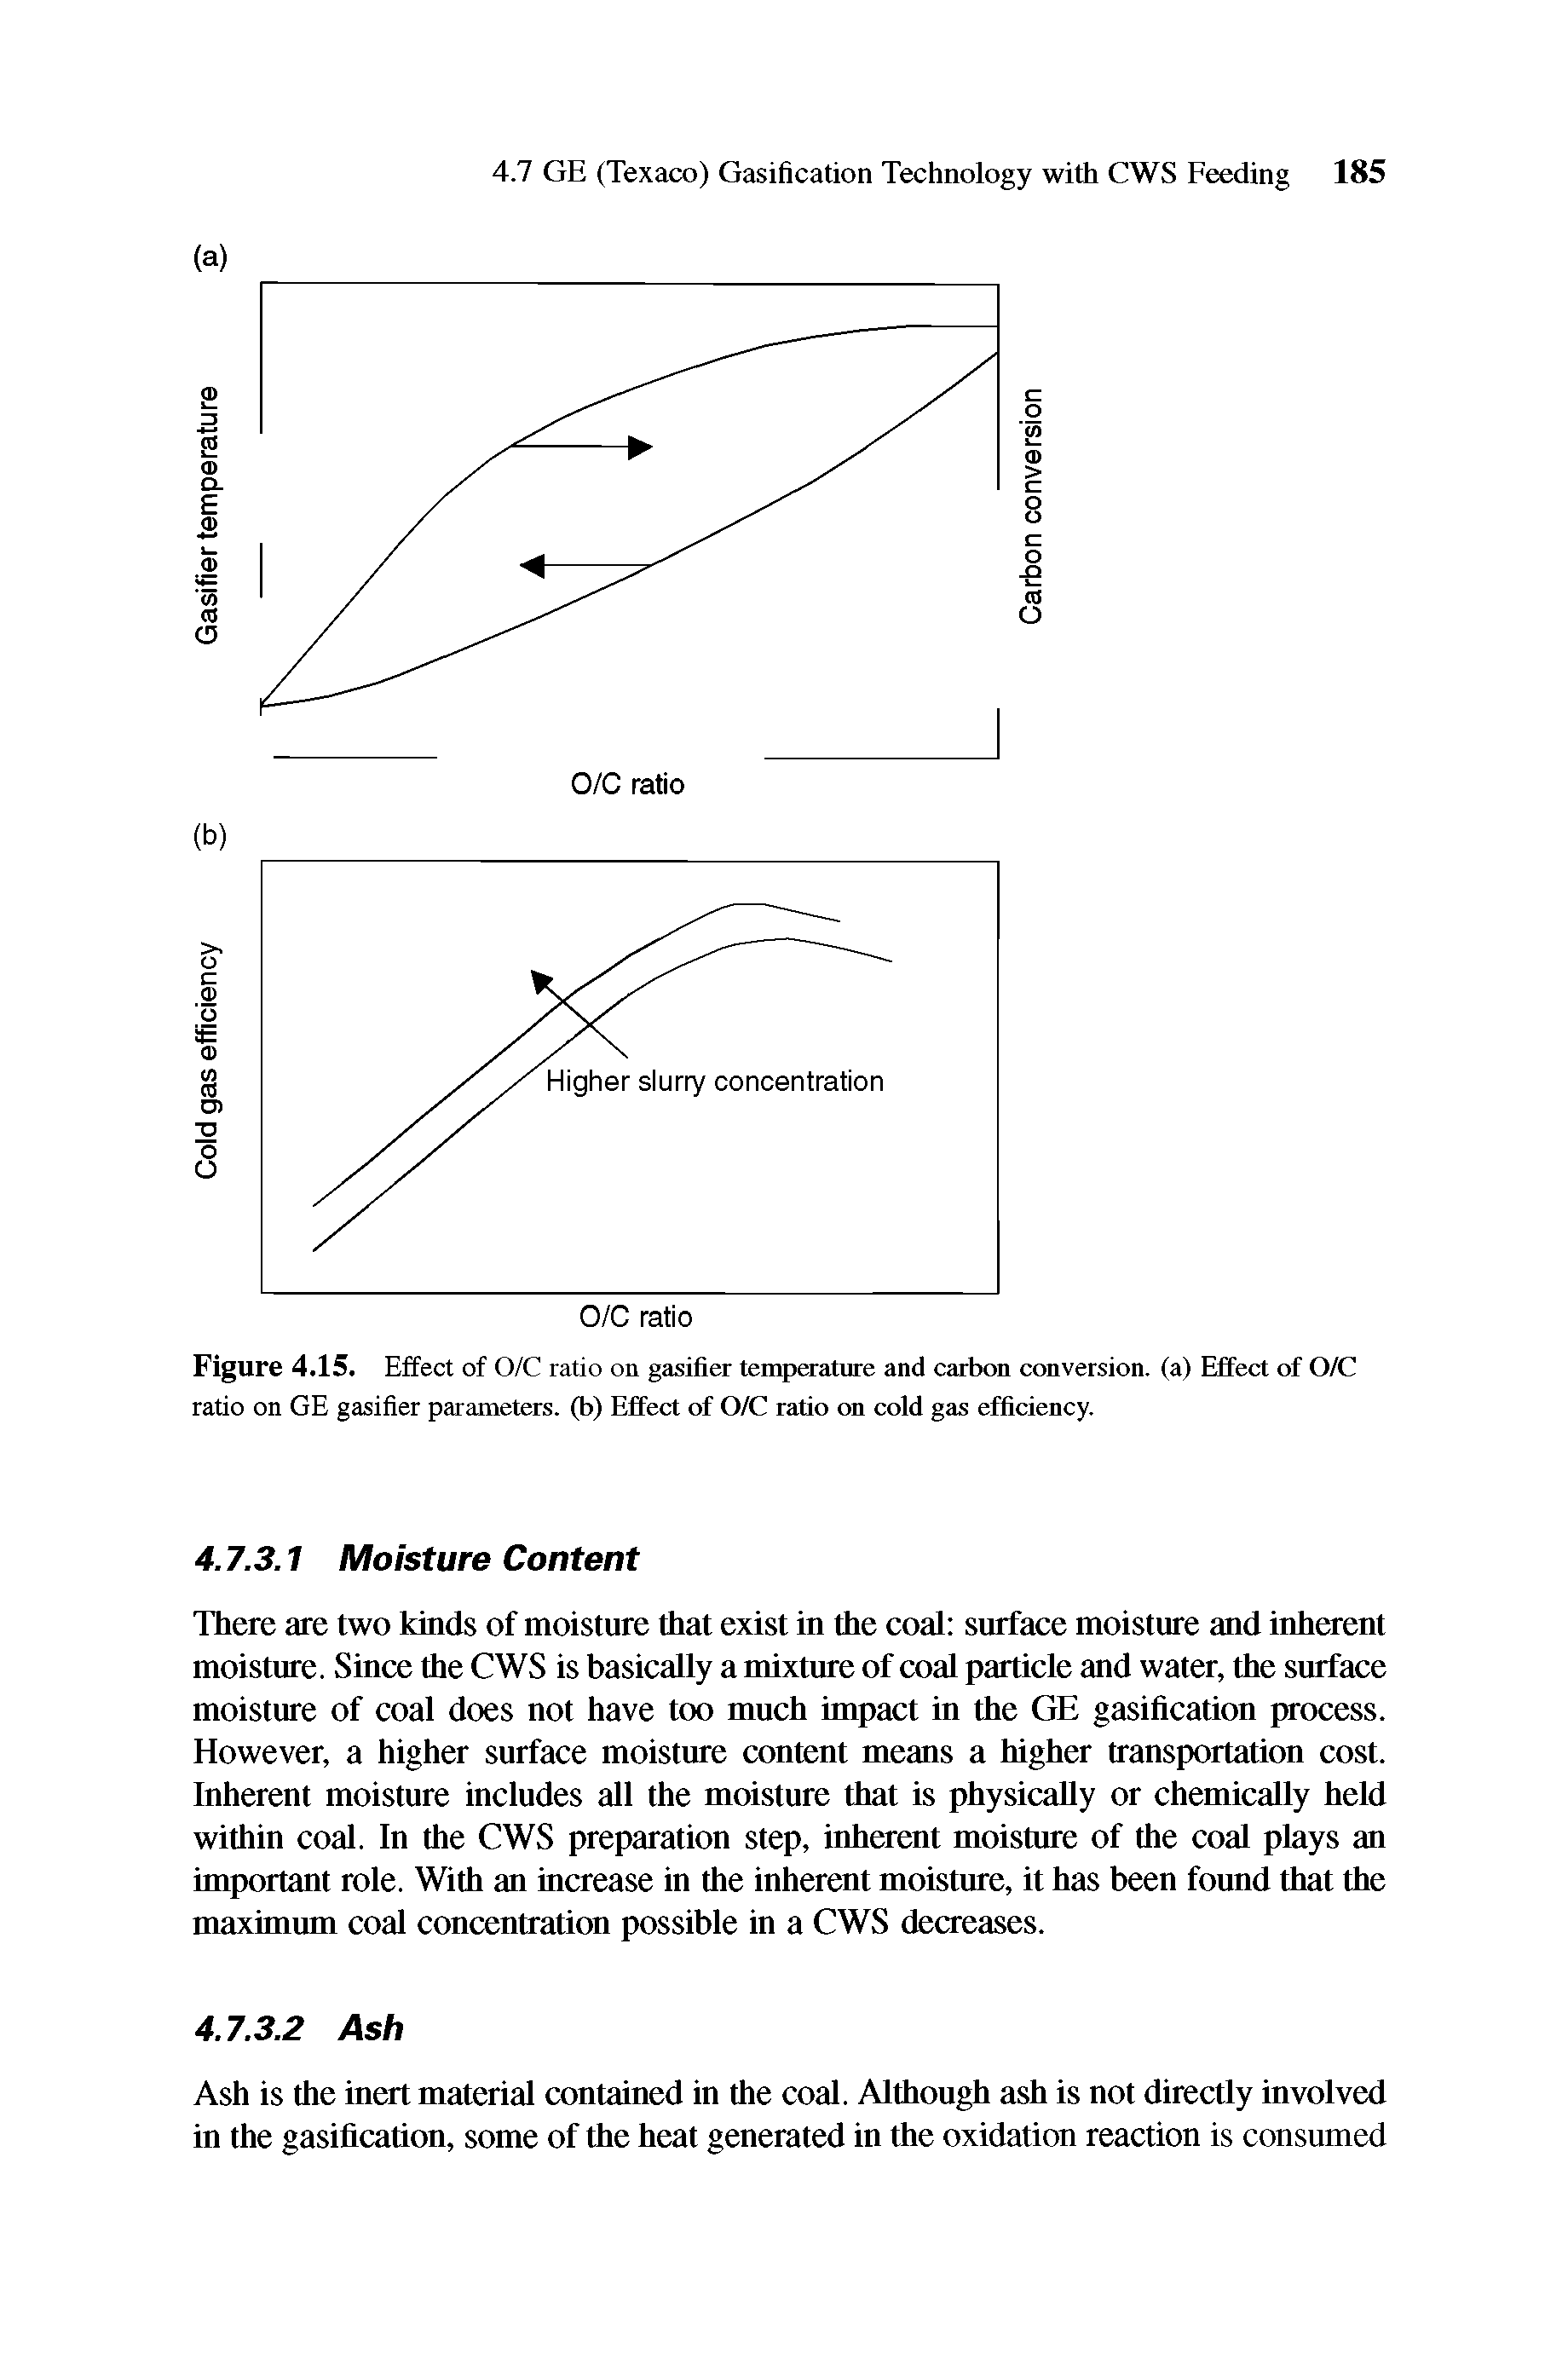 Figure 4.15. Effect of O/C ratio on gasifier temperature and carbon conversion, (a) Effect of O/C ratio on GE gasifier parameters, (b) Effect of O/C ratio on cold gas efficiency.